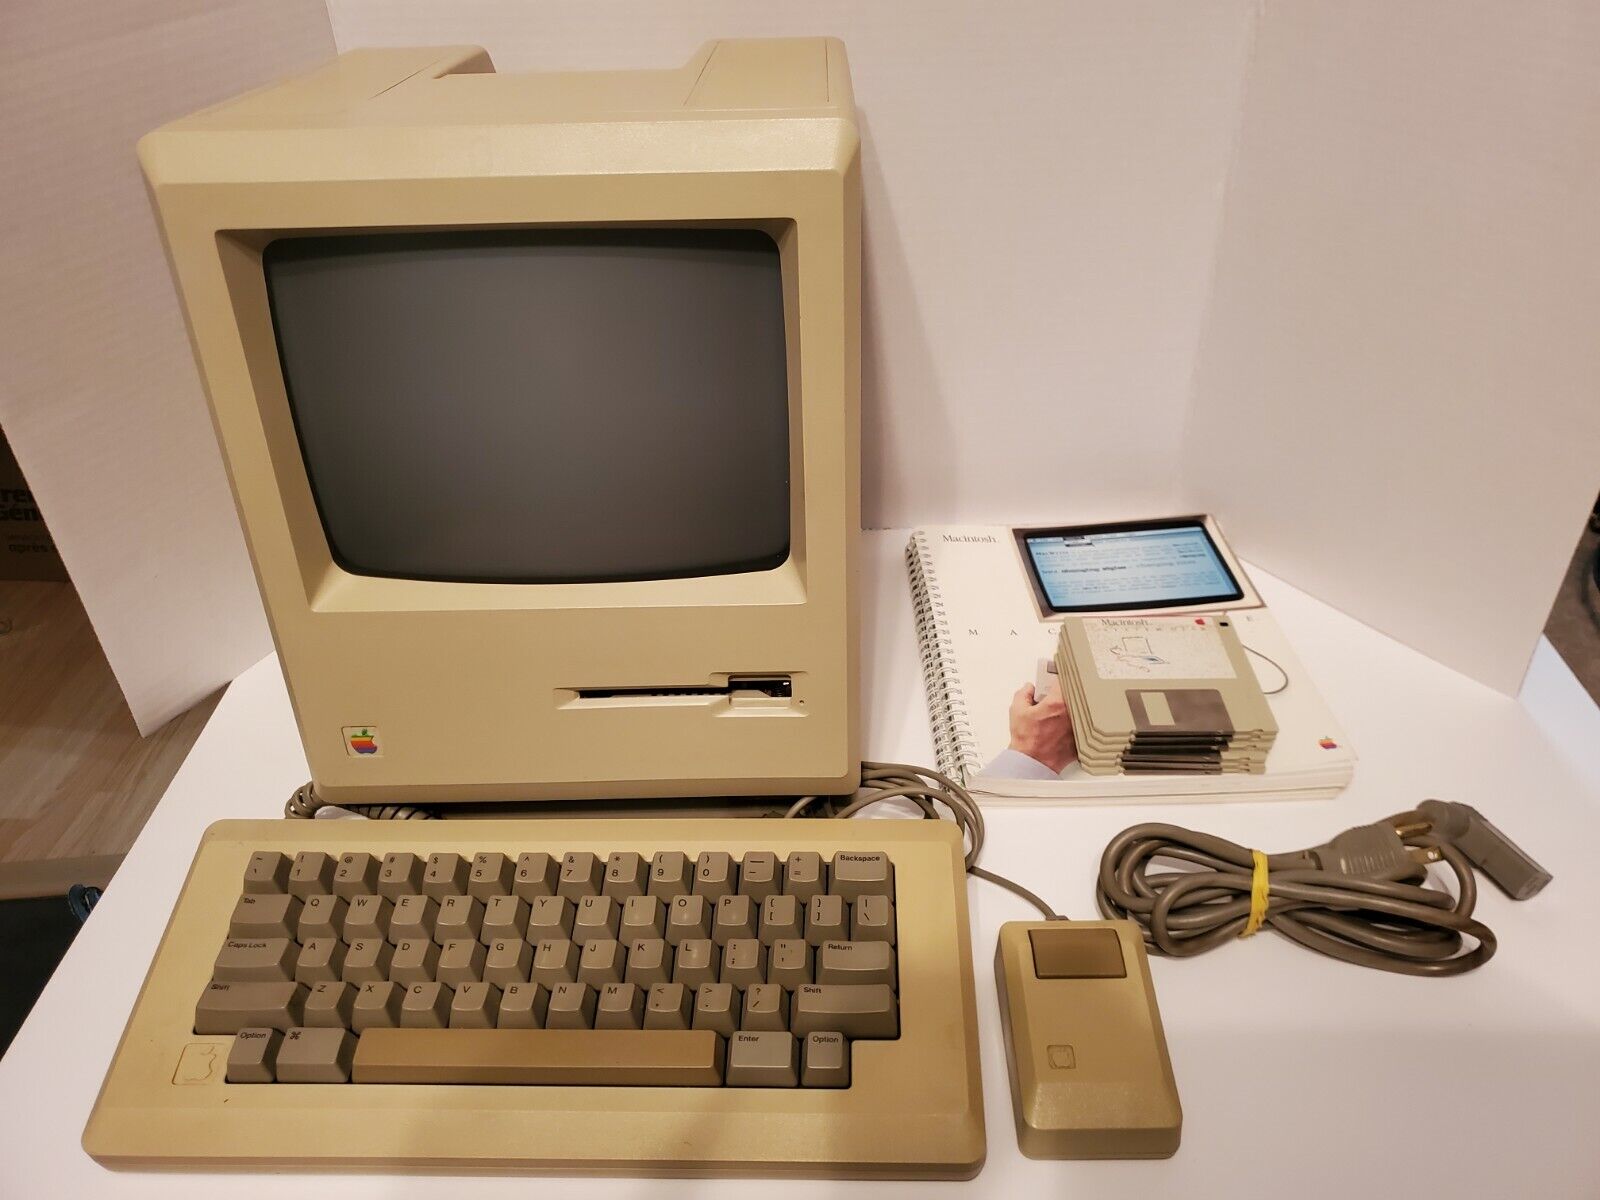 Apple Macintosh 128K M0001 Computer with 128K Badging - Clean & Tested Working